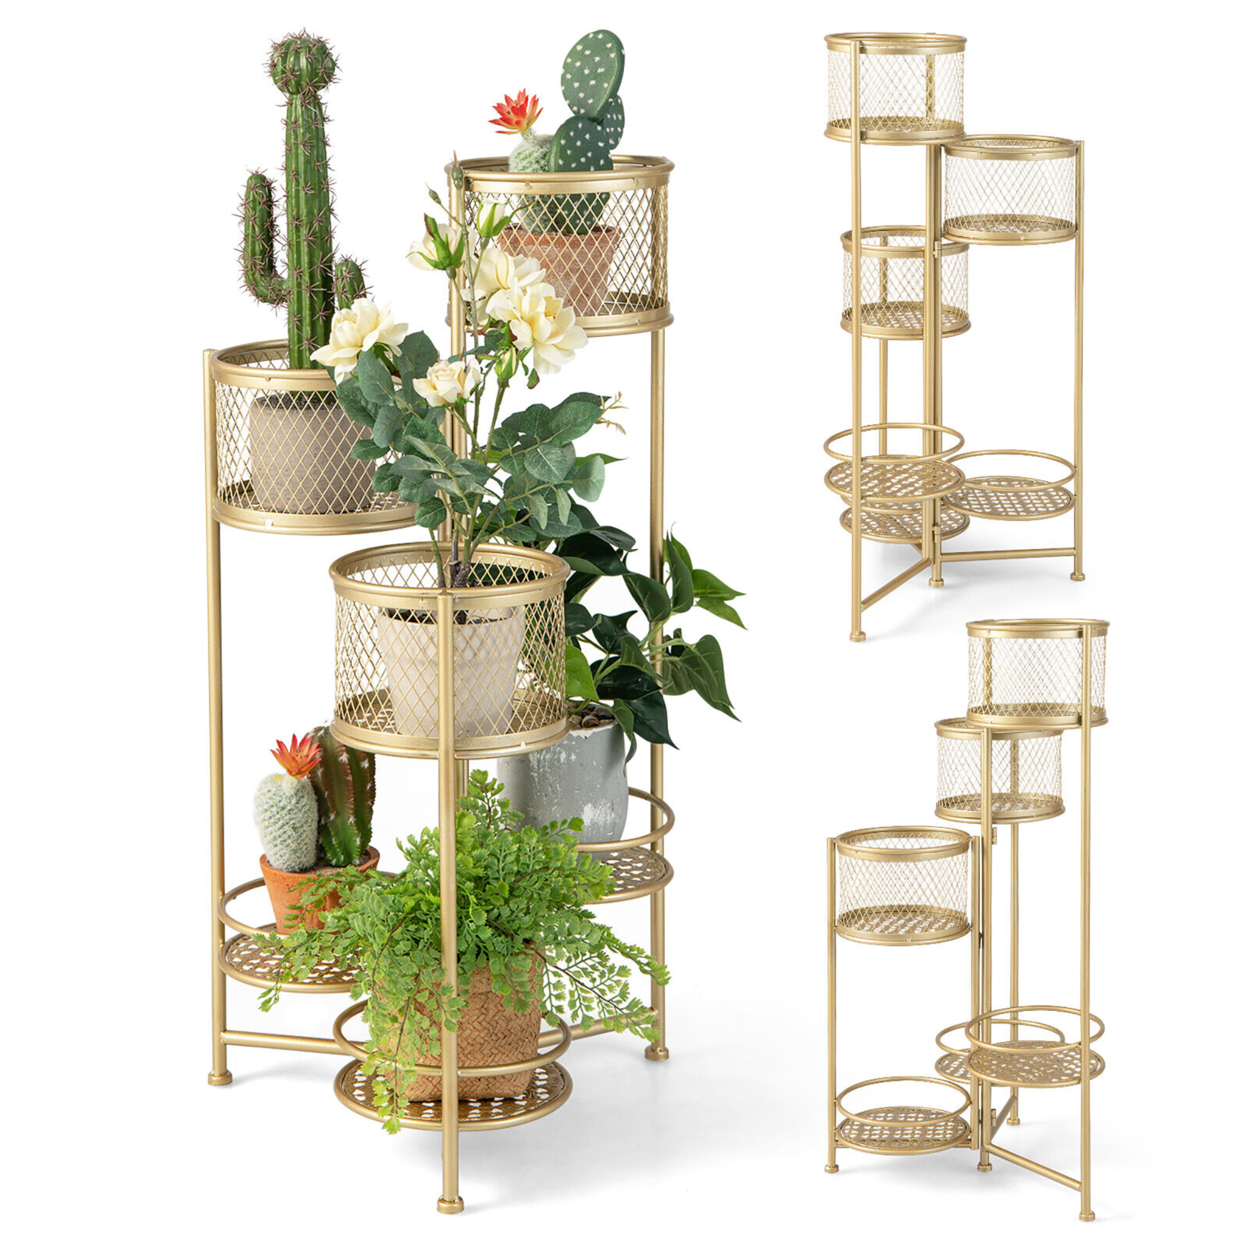 6-tier Foldable Metal Plant Stand Flower Pot Display Rack Hinged Tray Shelf